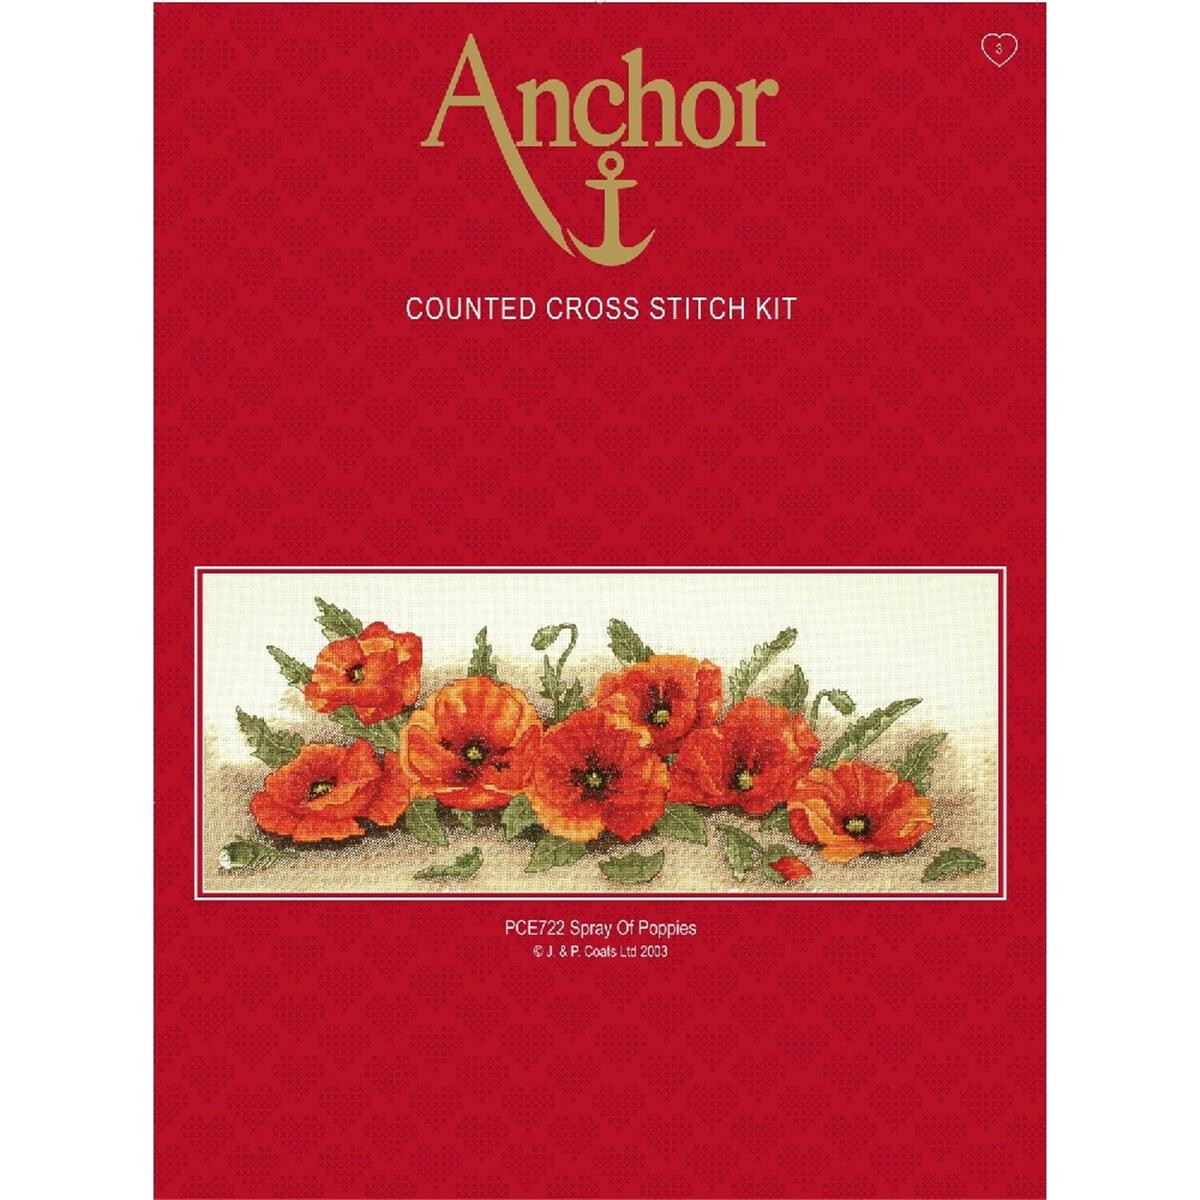 Anchor counted Cross Stitch kit "Spray Of...